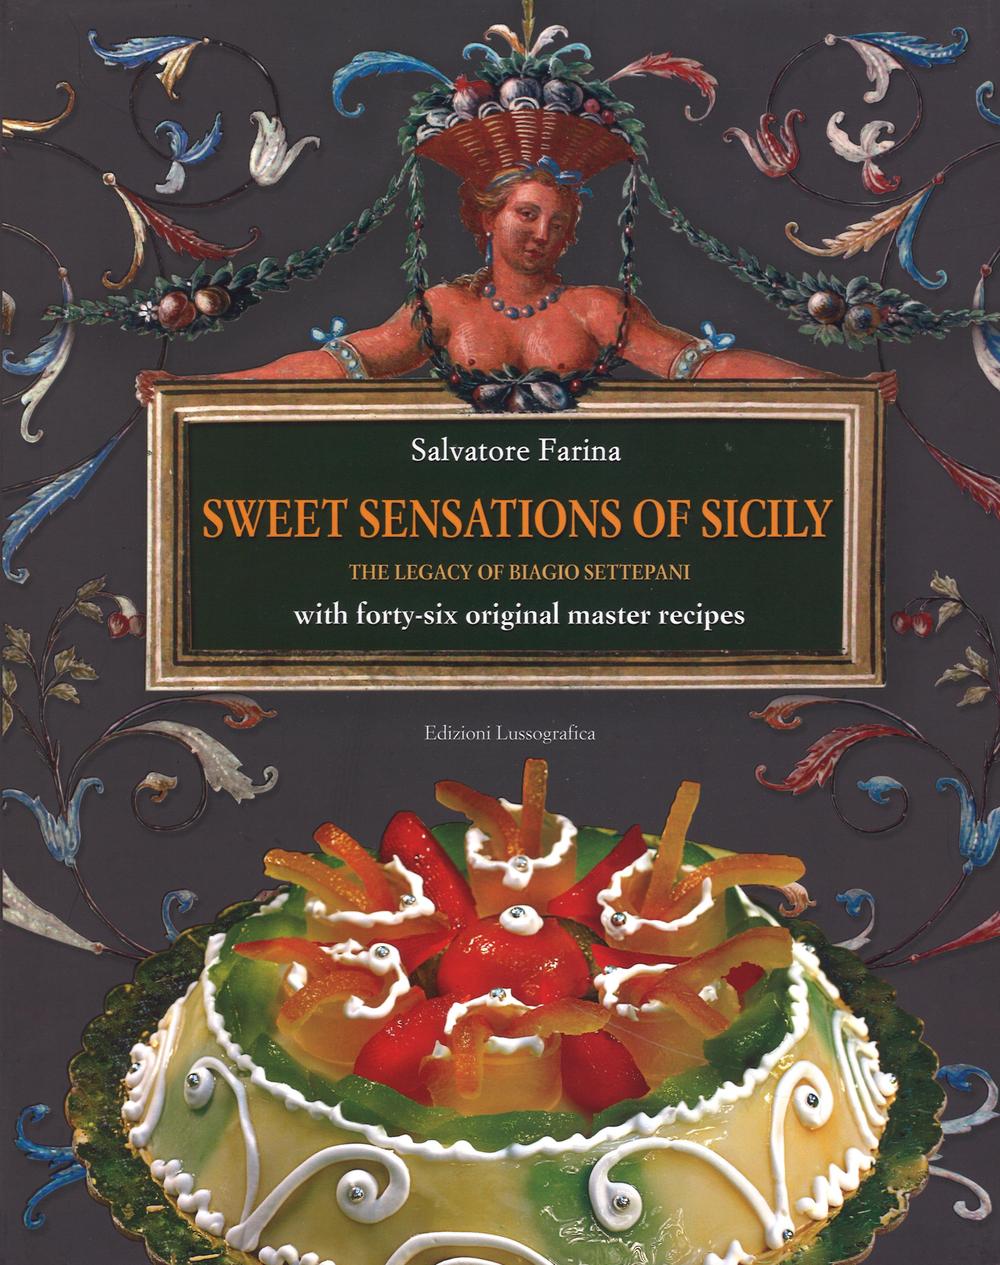 Sweet sensations of Sicily. The legacy of Biagio Settepani with forty-six original master recipes